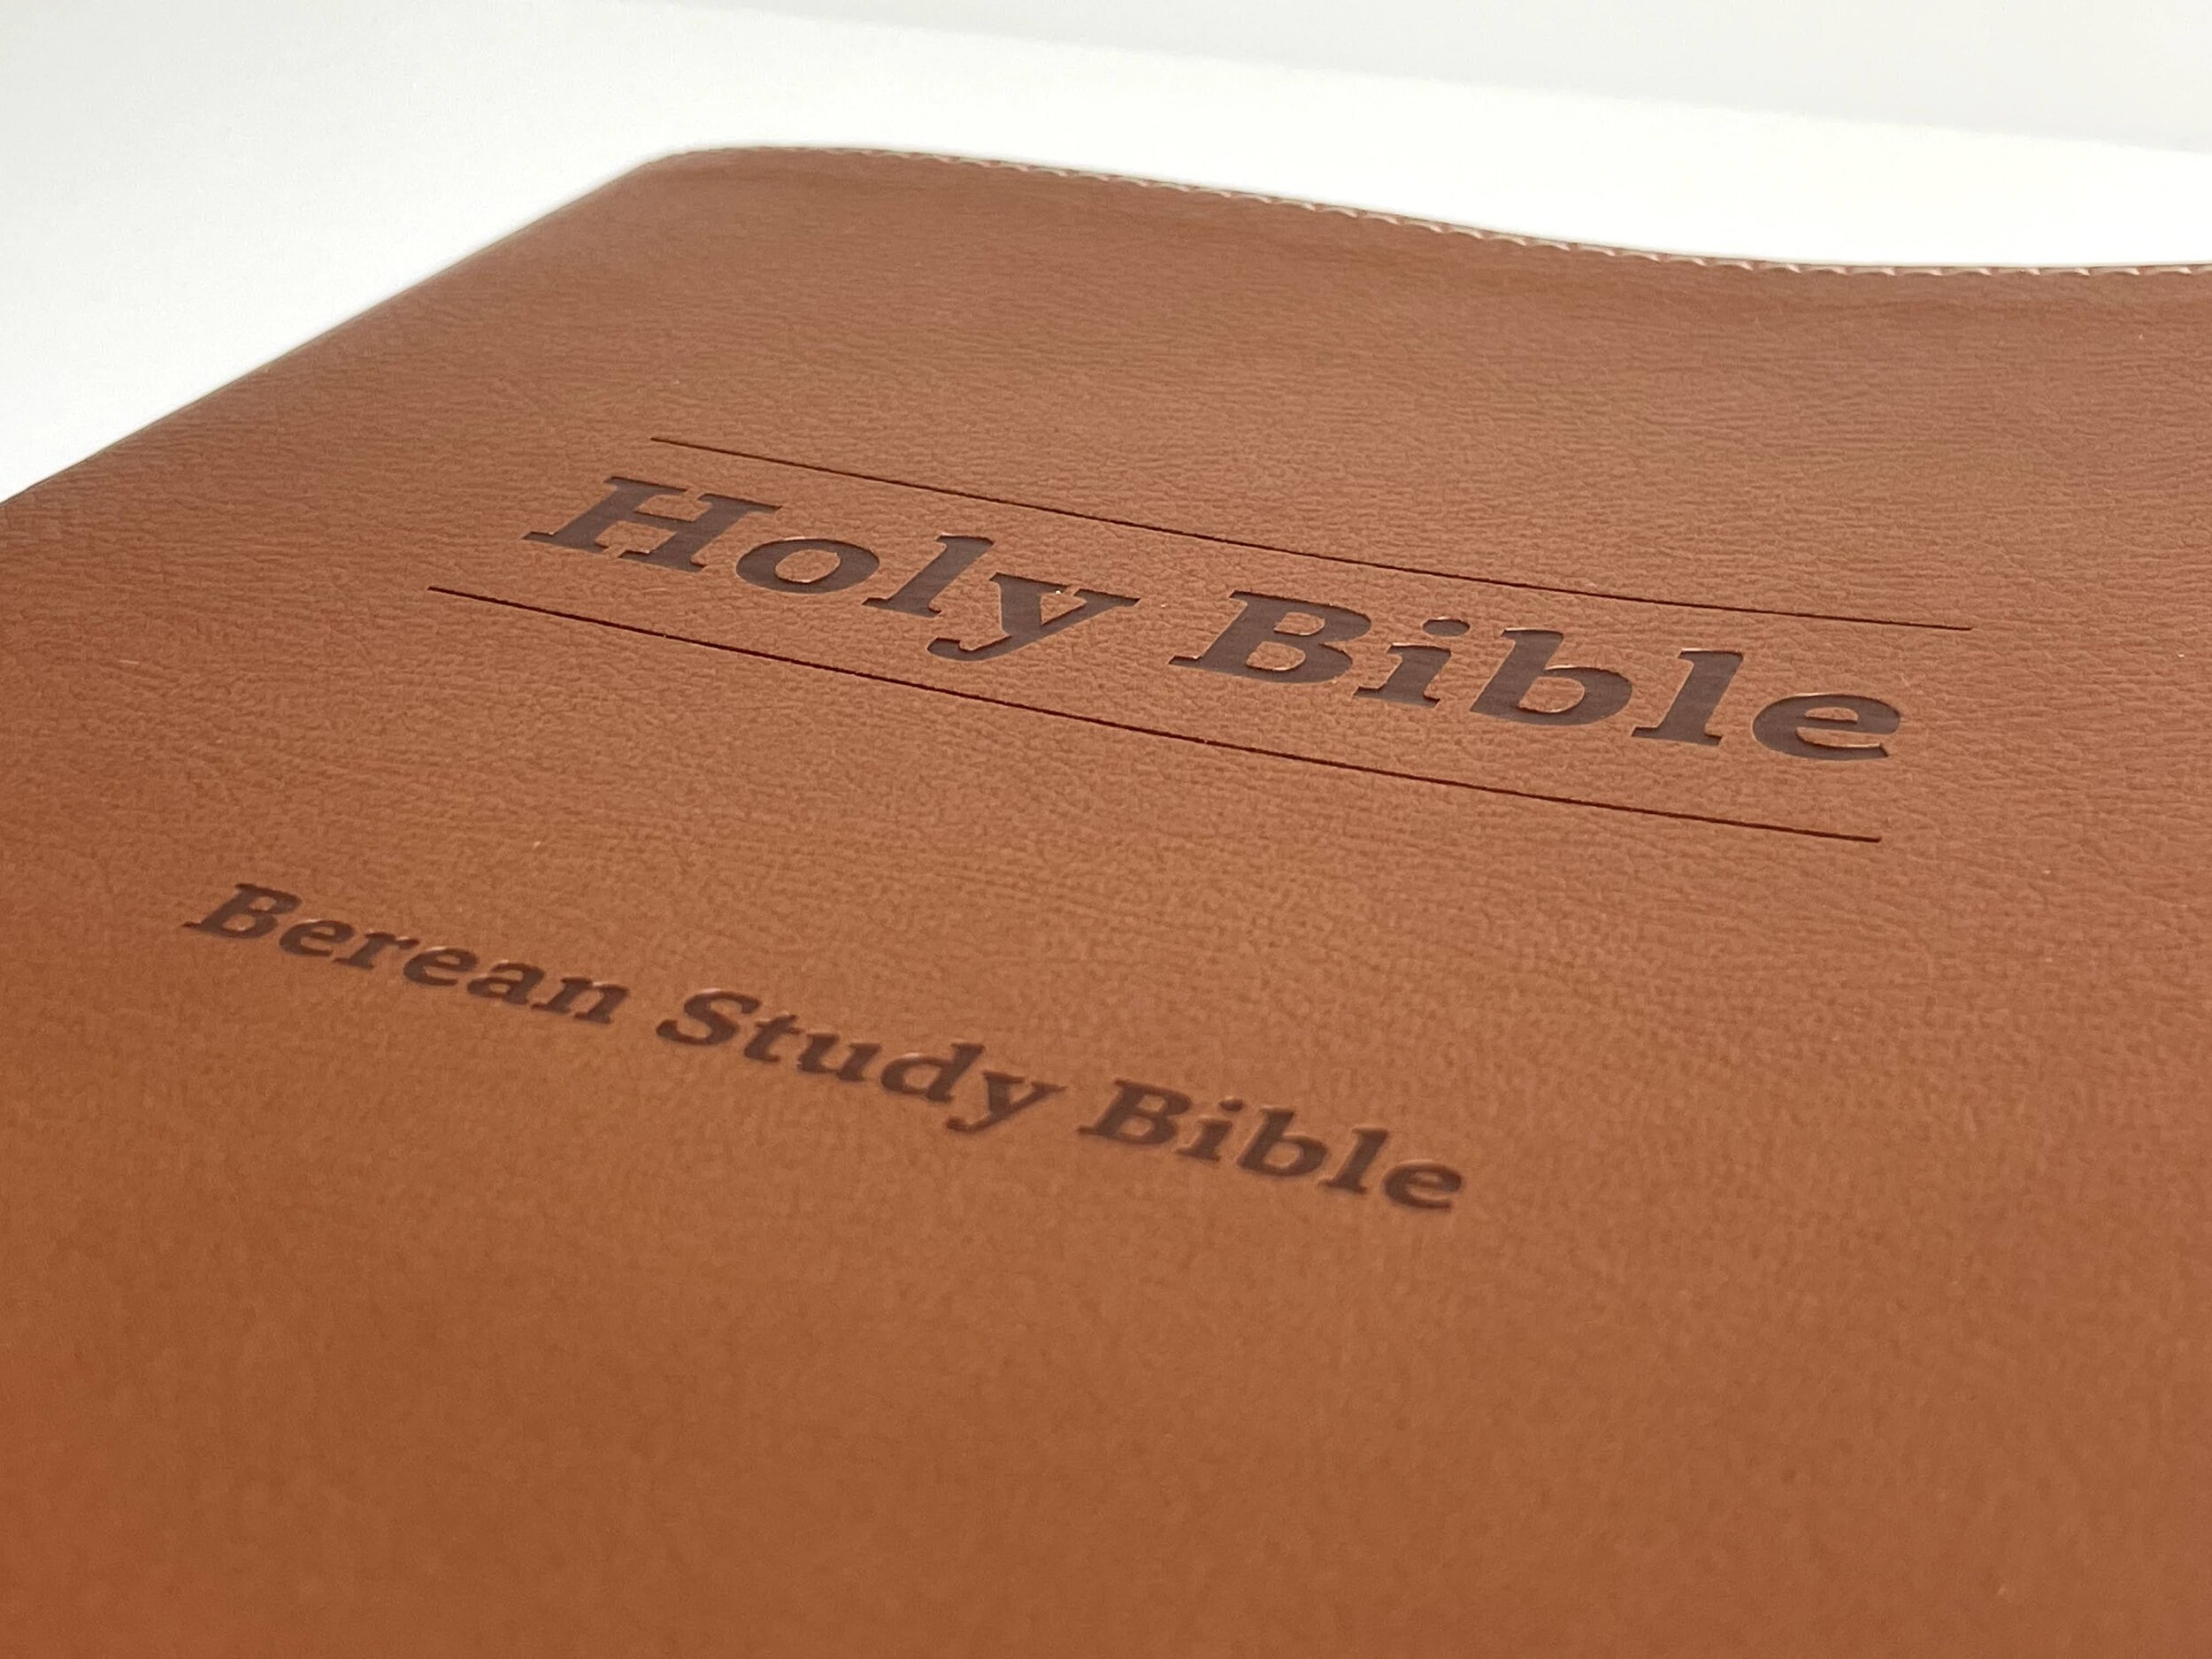 Niv Study Bible, Fully Revised Edition, Genuine Leather Black, Indexed, Cb  